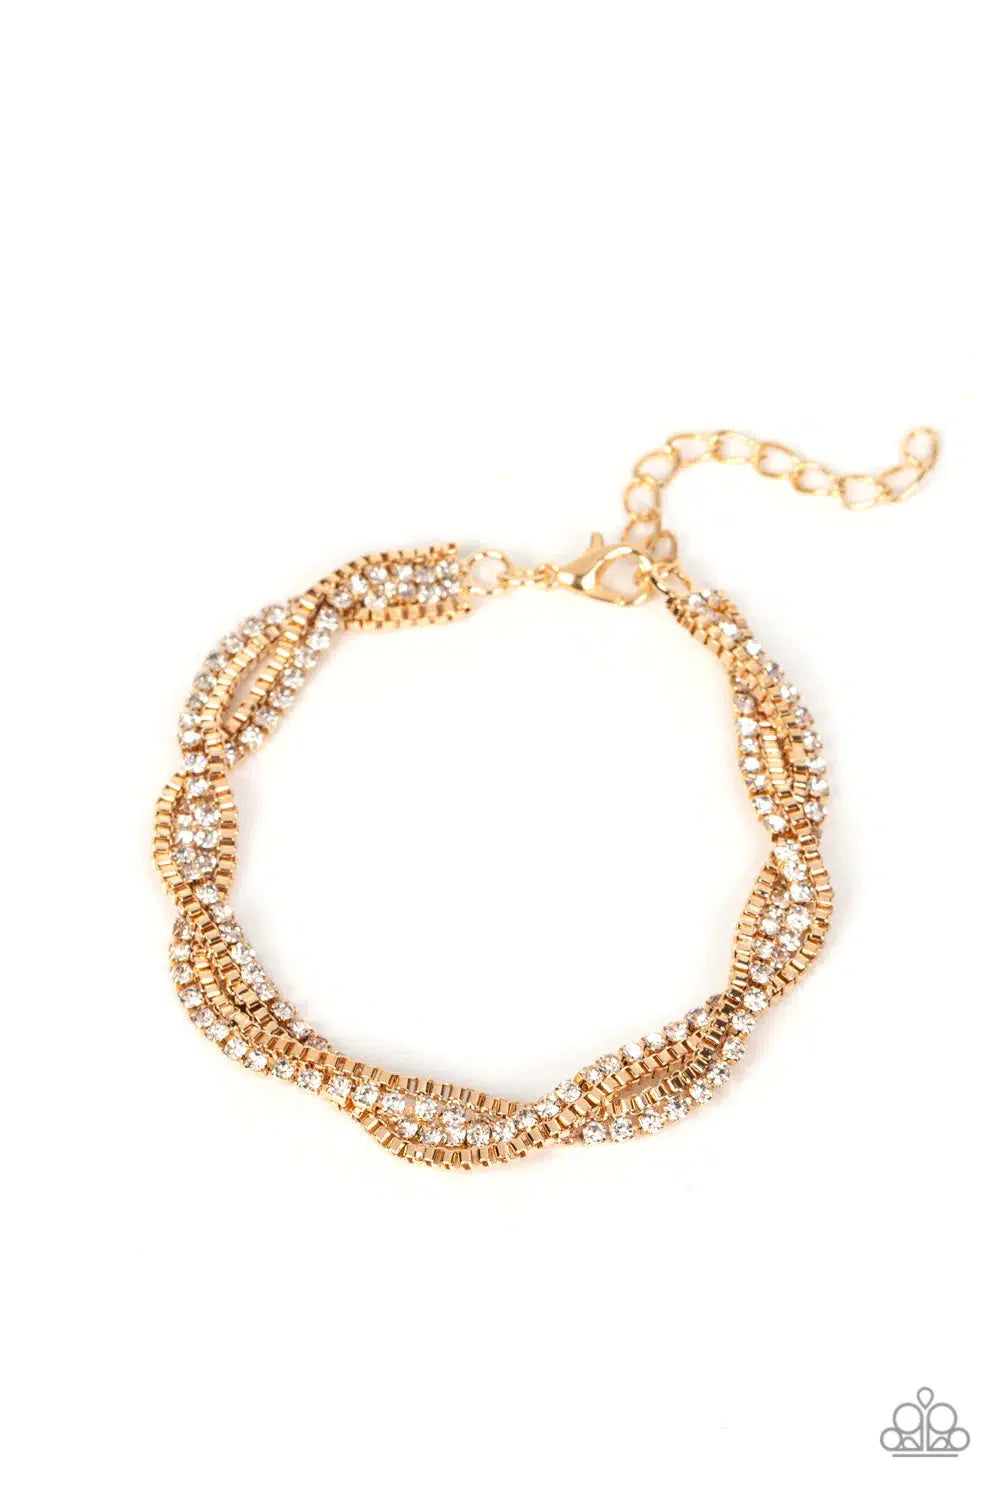 Box Office Bling Gold Bracelet - Paparazzi Accessories- lightbox - CarasShop.com - $5 Jewelry by Cara Jewels